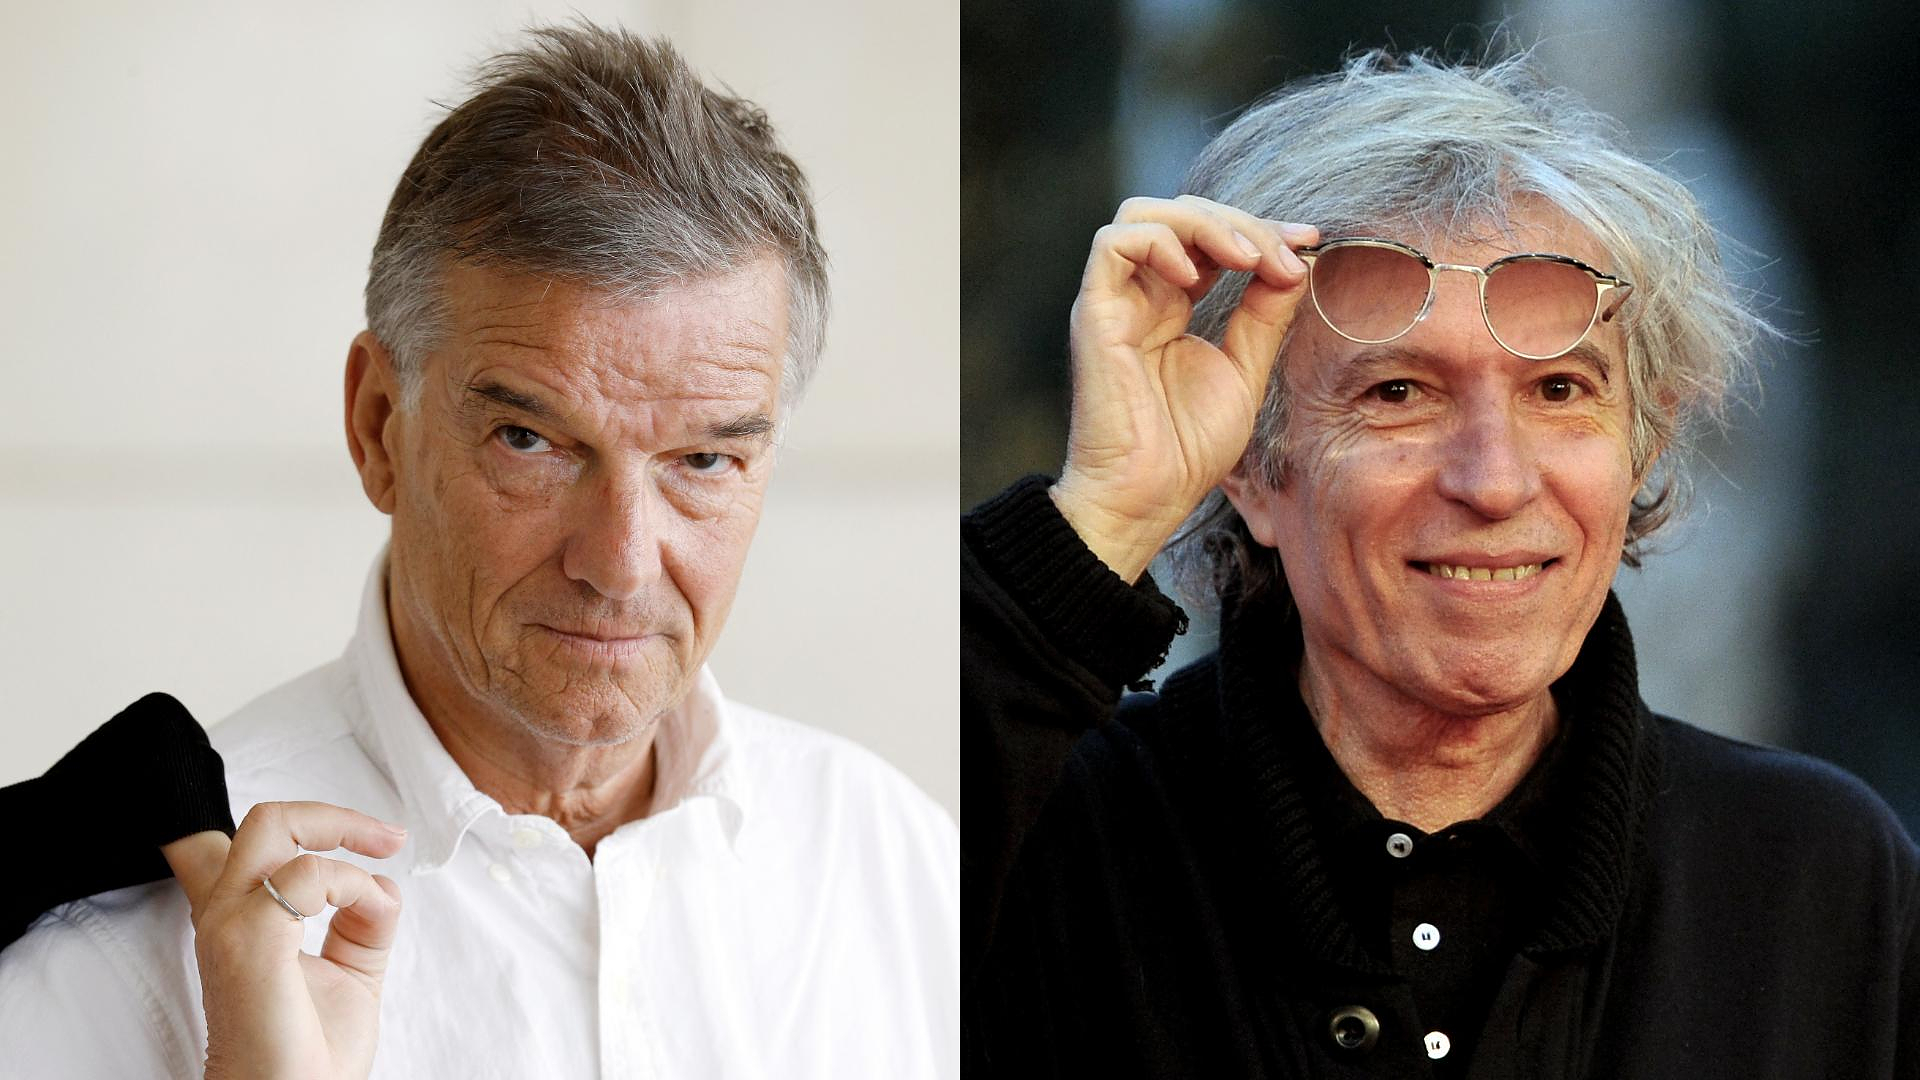 Benoît Jacquot and Jacques Doillon struck by the “New Wave”